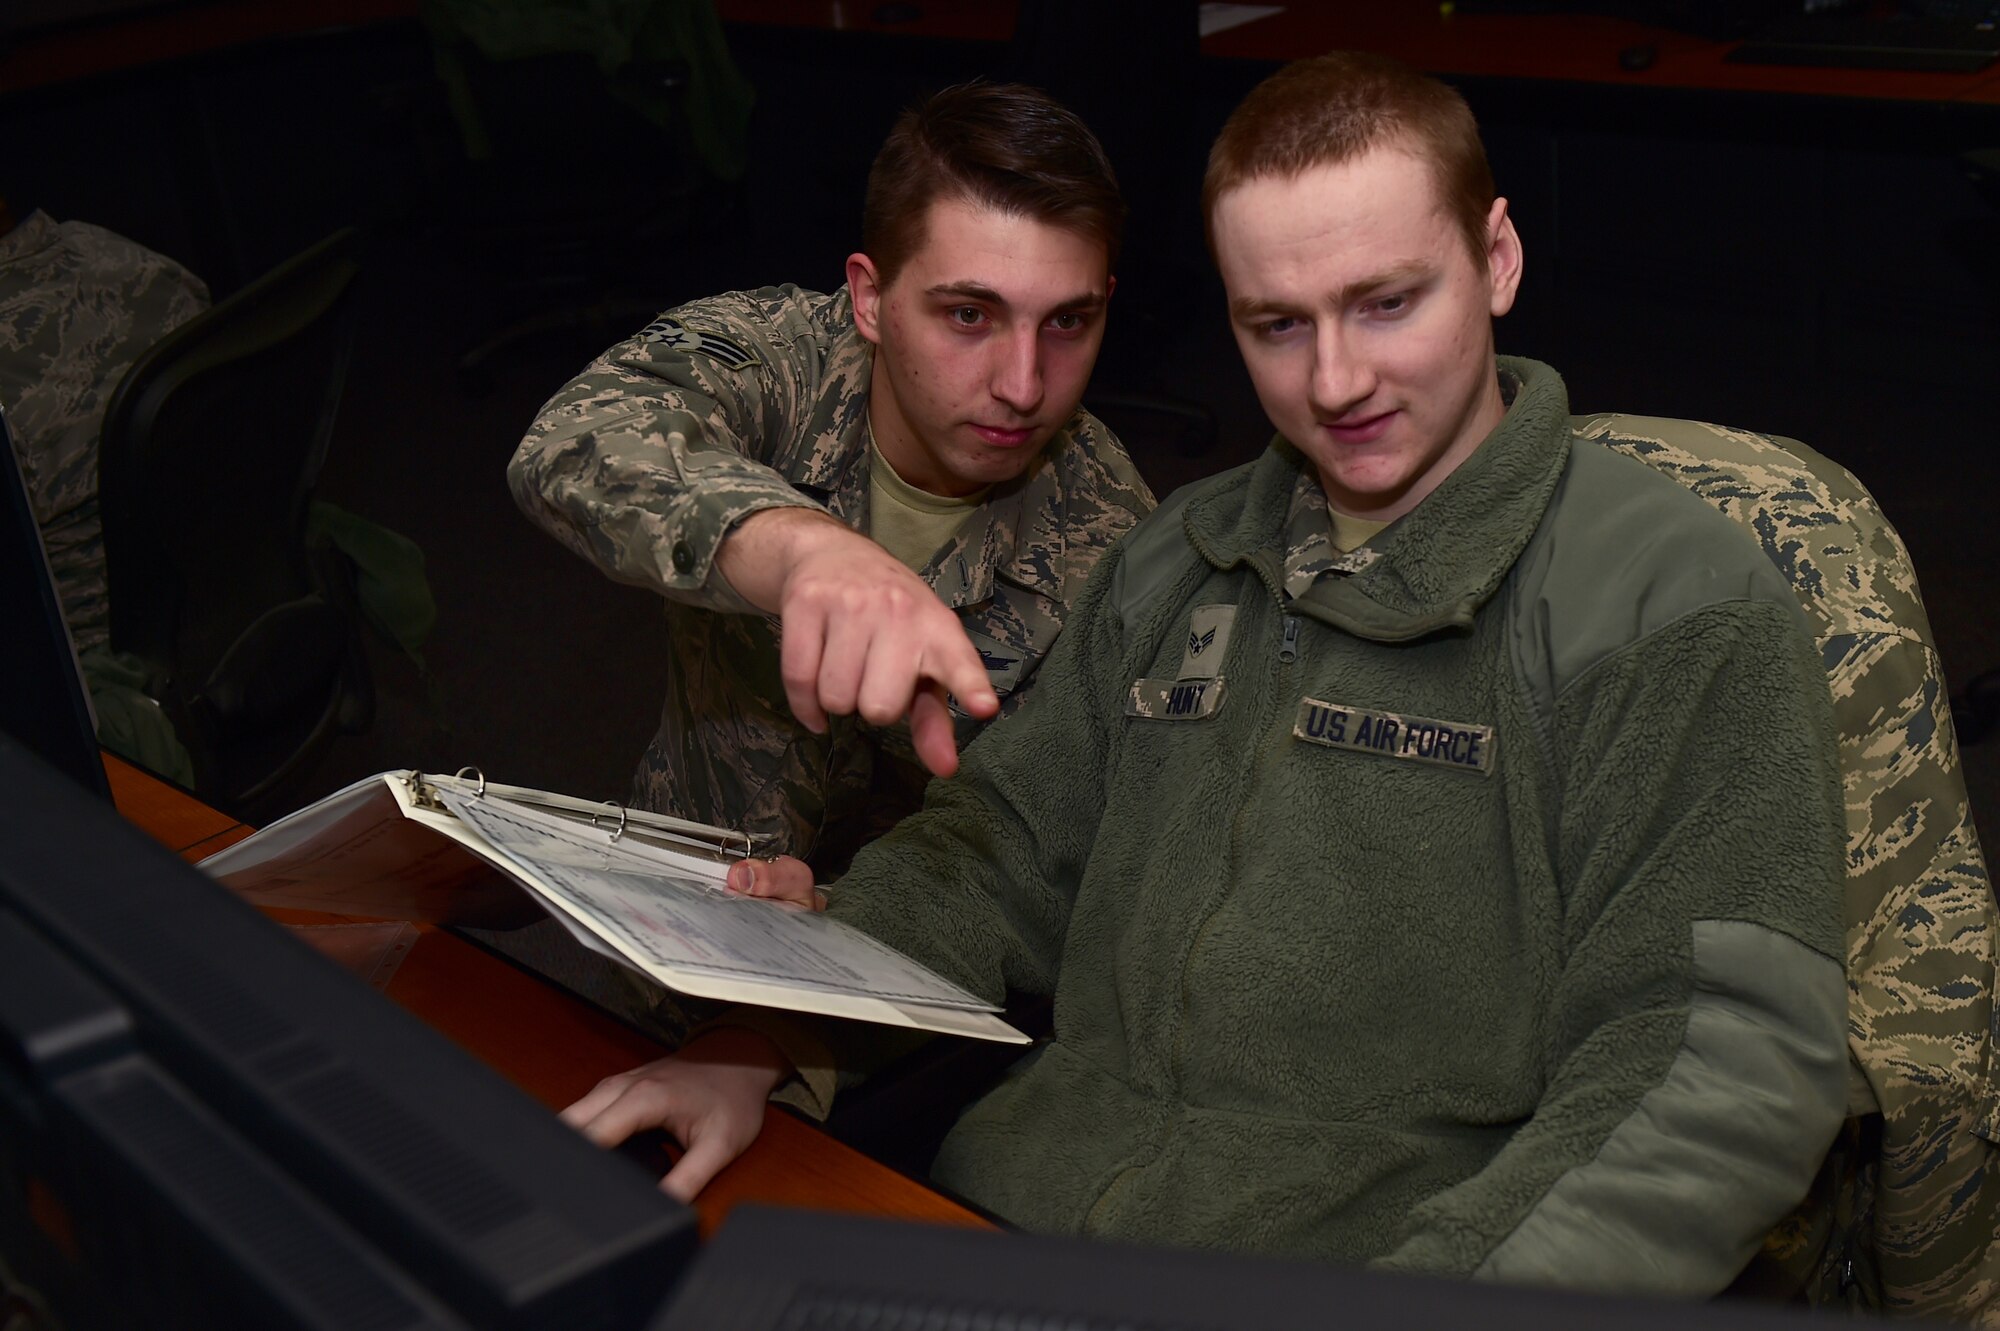 Senior Airman Jacob Bercel, 8th Space Warning Squadron satellite systems operator, helps fellow classmate, Senior Airman Samuel Hunt, 2nd Space Warning Squadron satellite systems operator, Jan. 19, 2017, during a class on Buckley Air Force Base, Colo. The class was for space operators to learn more about commanding satellites and responding to anomalous conditions on the satellites. The Buckley AFB helping agencies allow operators to focus on the 460th Space Wing mission. (U.S. Air Force photo by Airman 1st Class Gabrielle Spradling/Released)